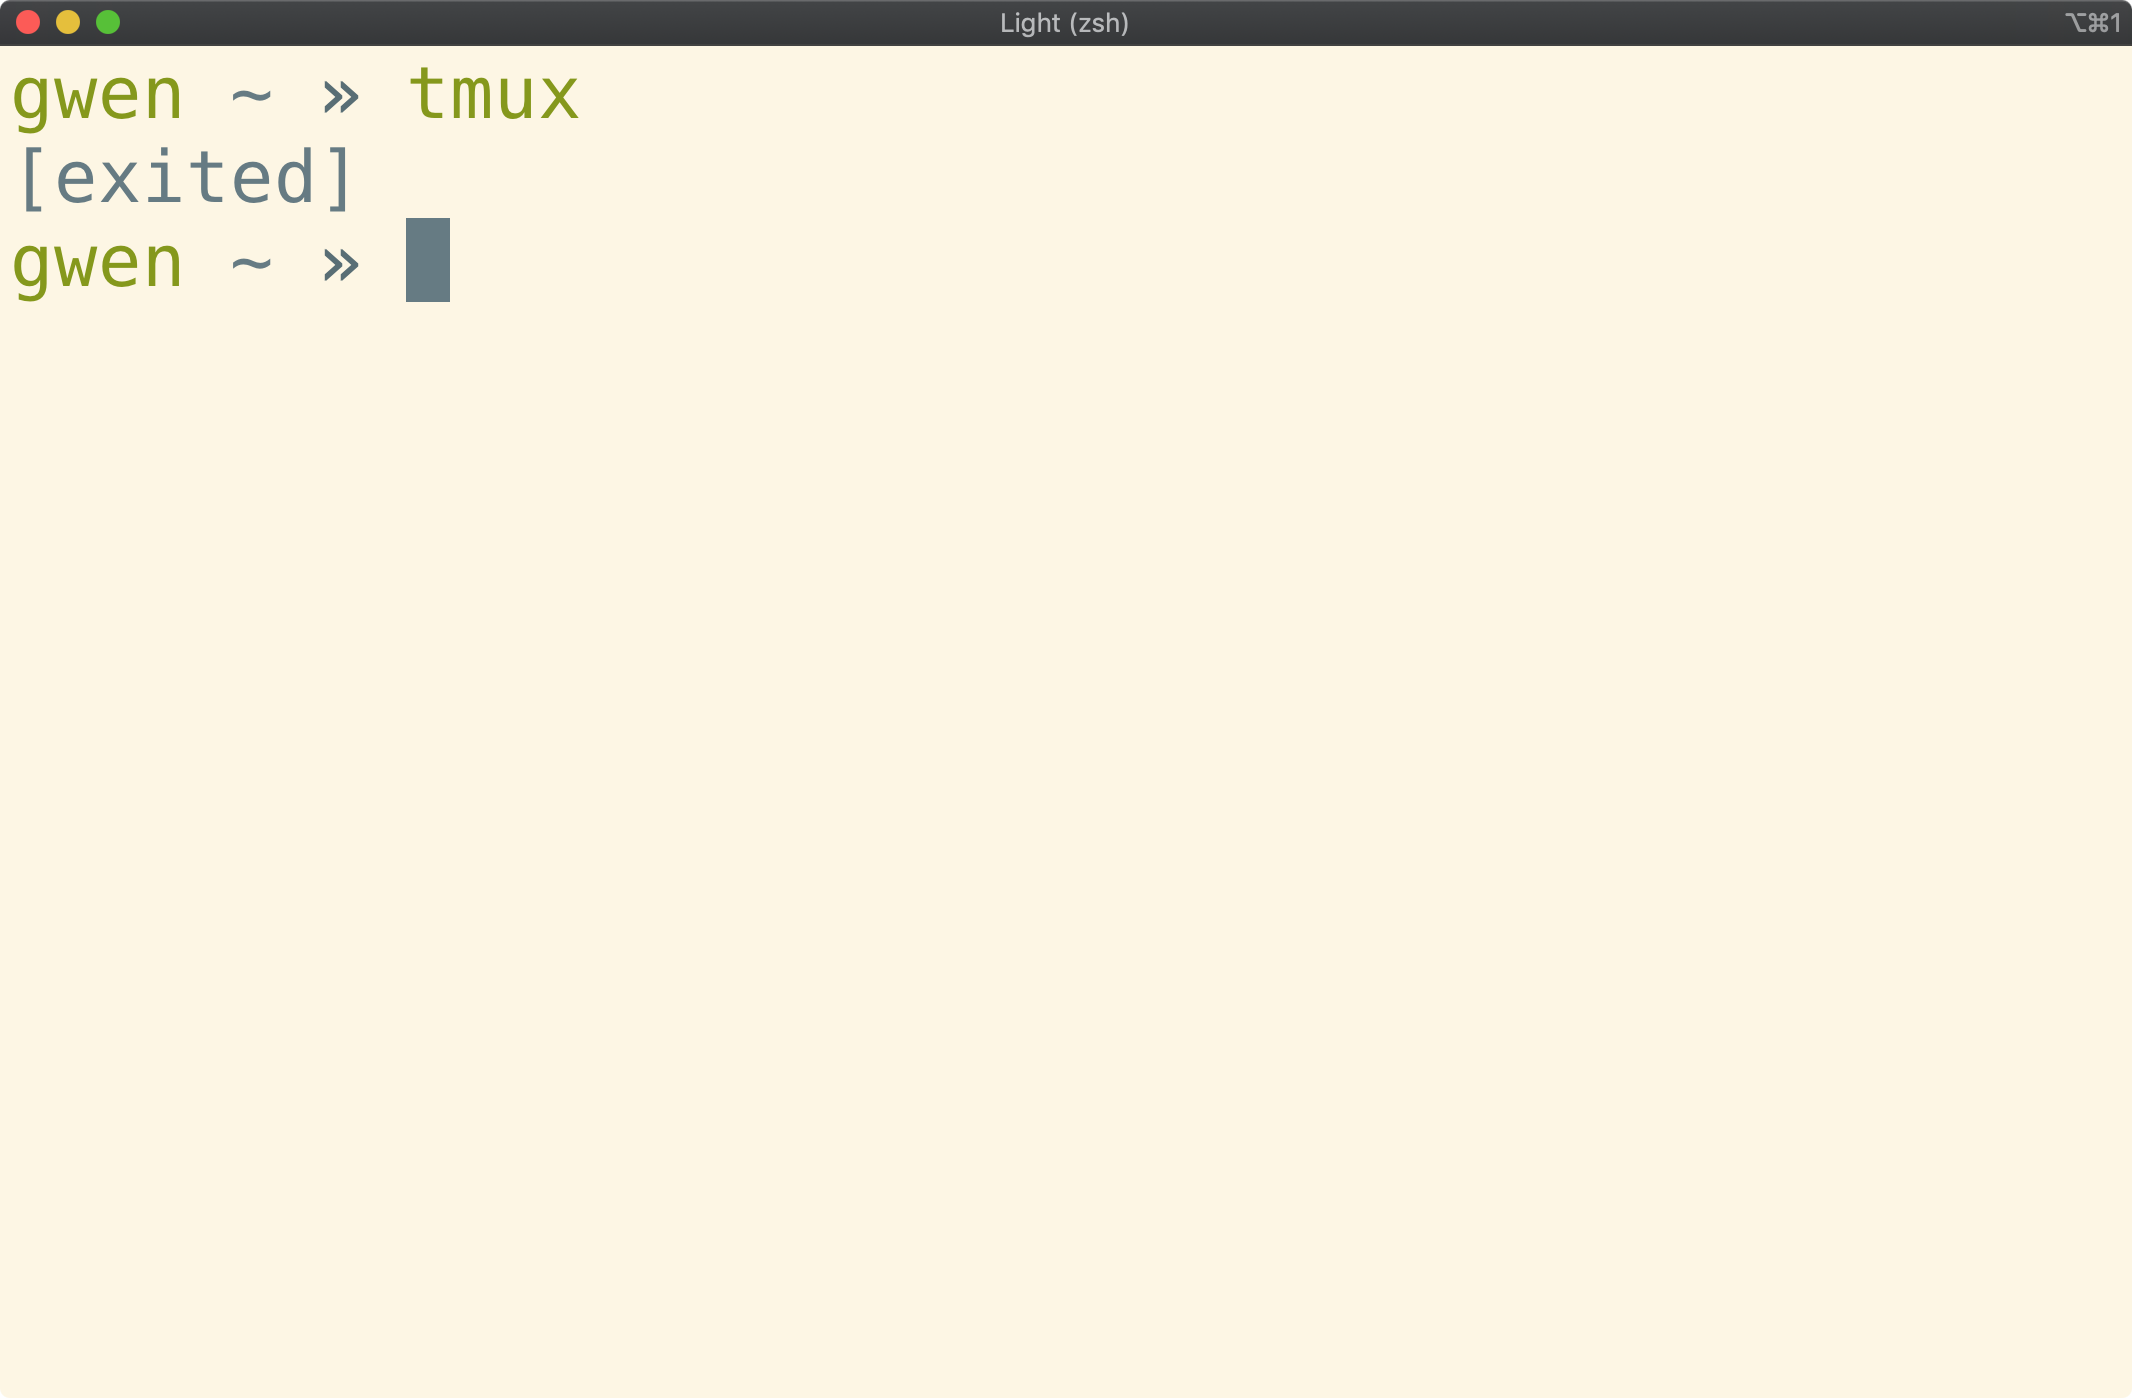 Terminal window after exiting Tmux